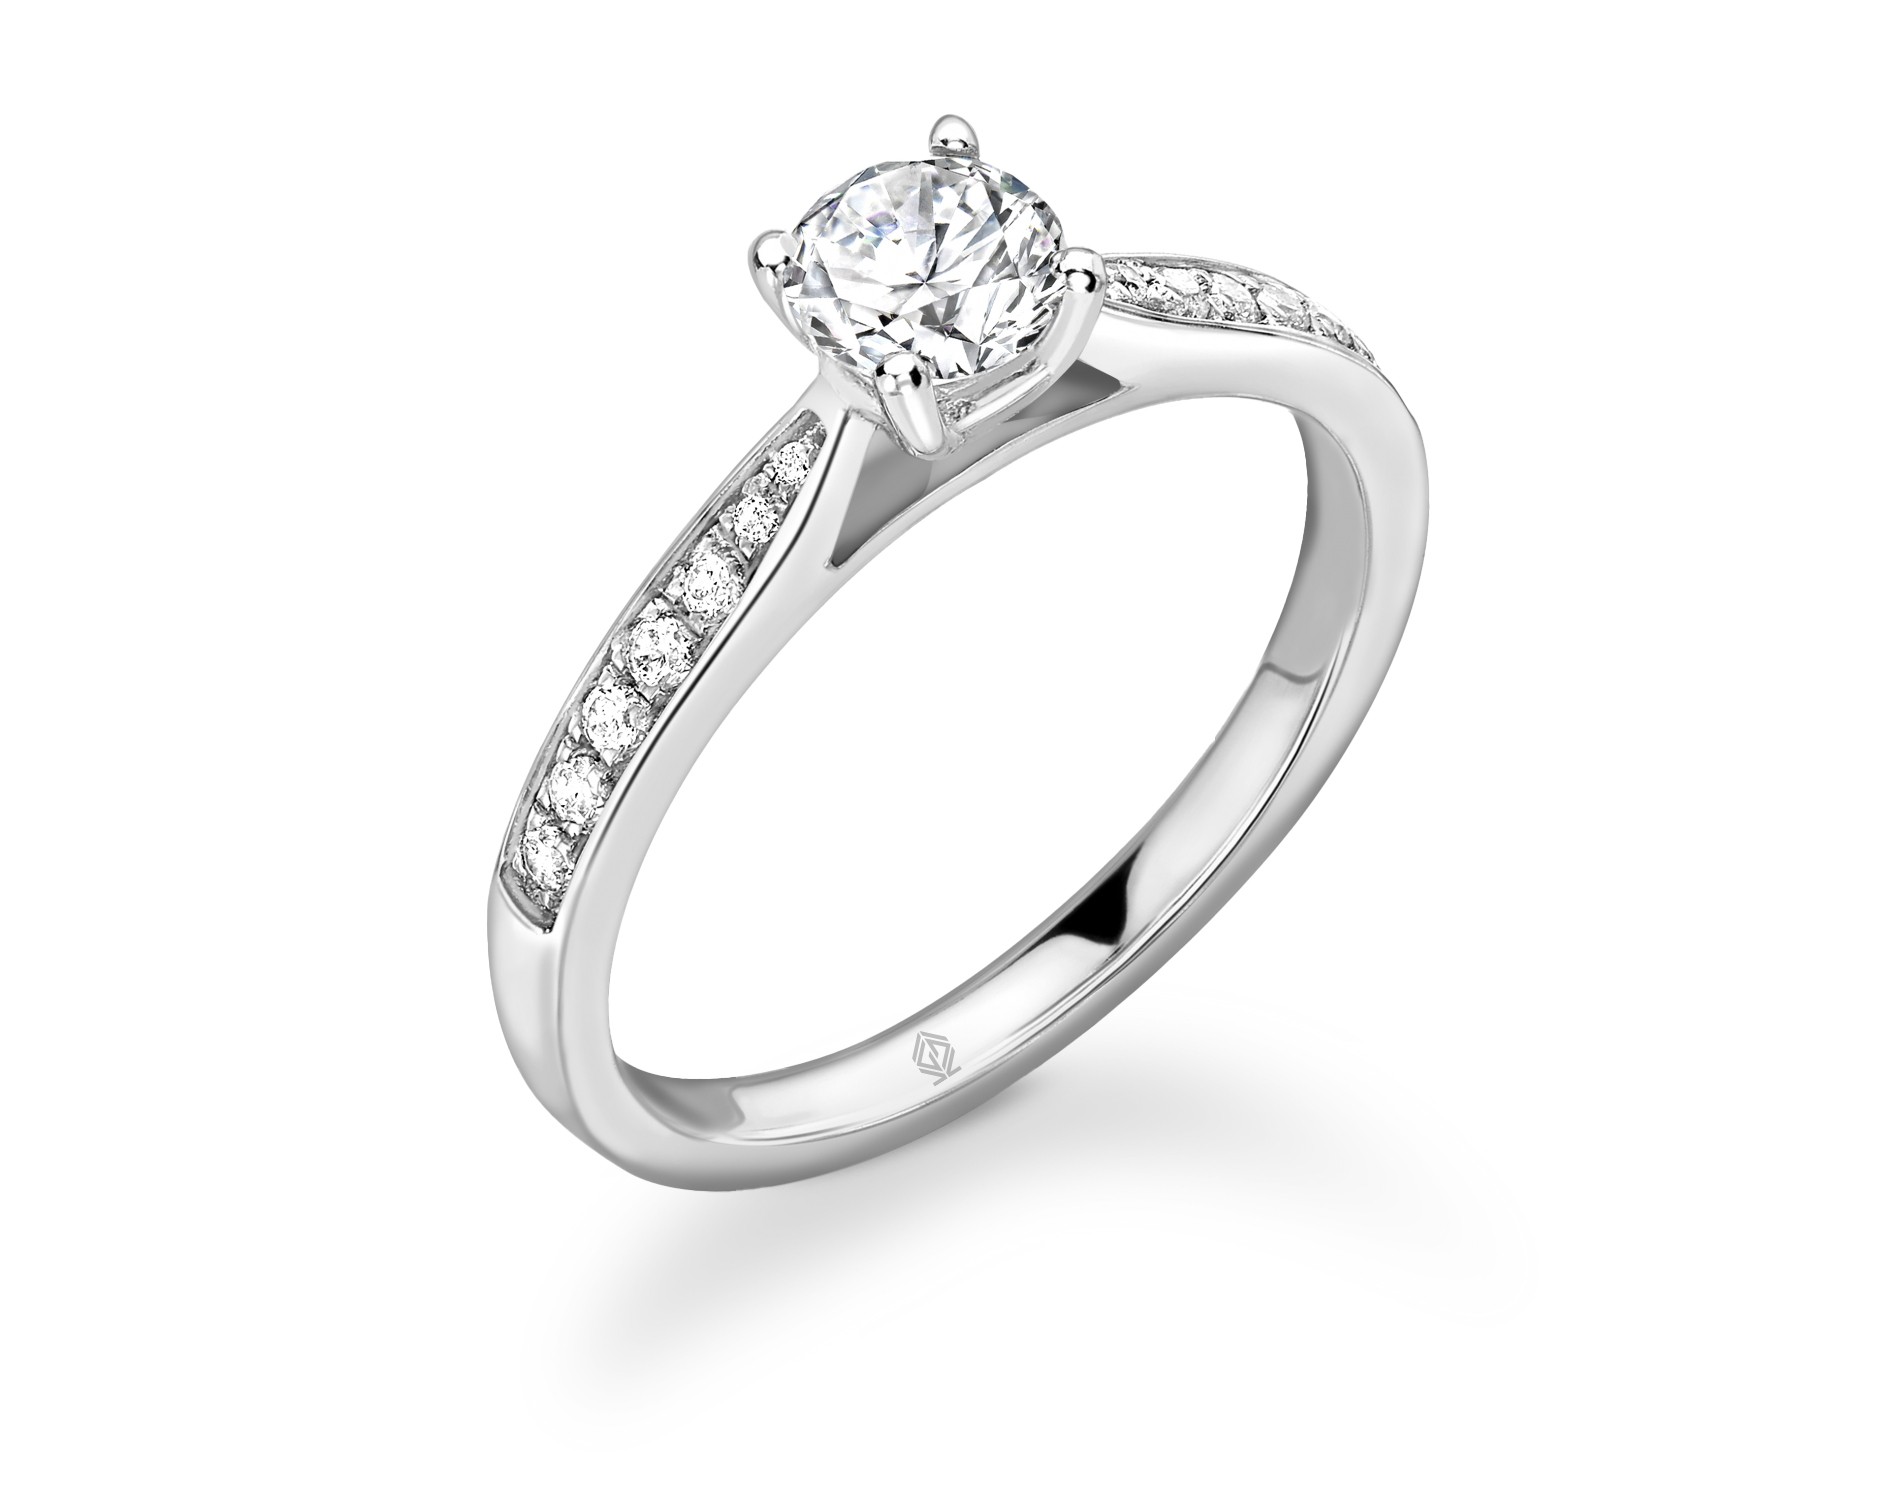 18K WHITE GOLD ROUND CUT 4 PRONGS DIAMOND ENGAGEMENT RING SIDE STONES WITH CHANNEL SET